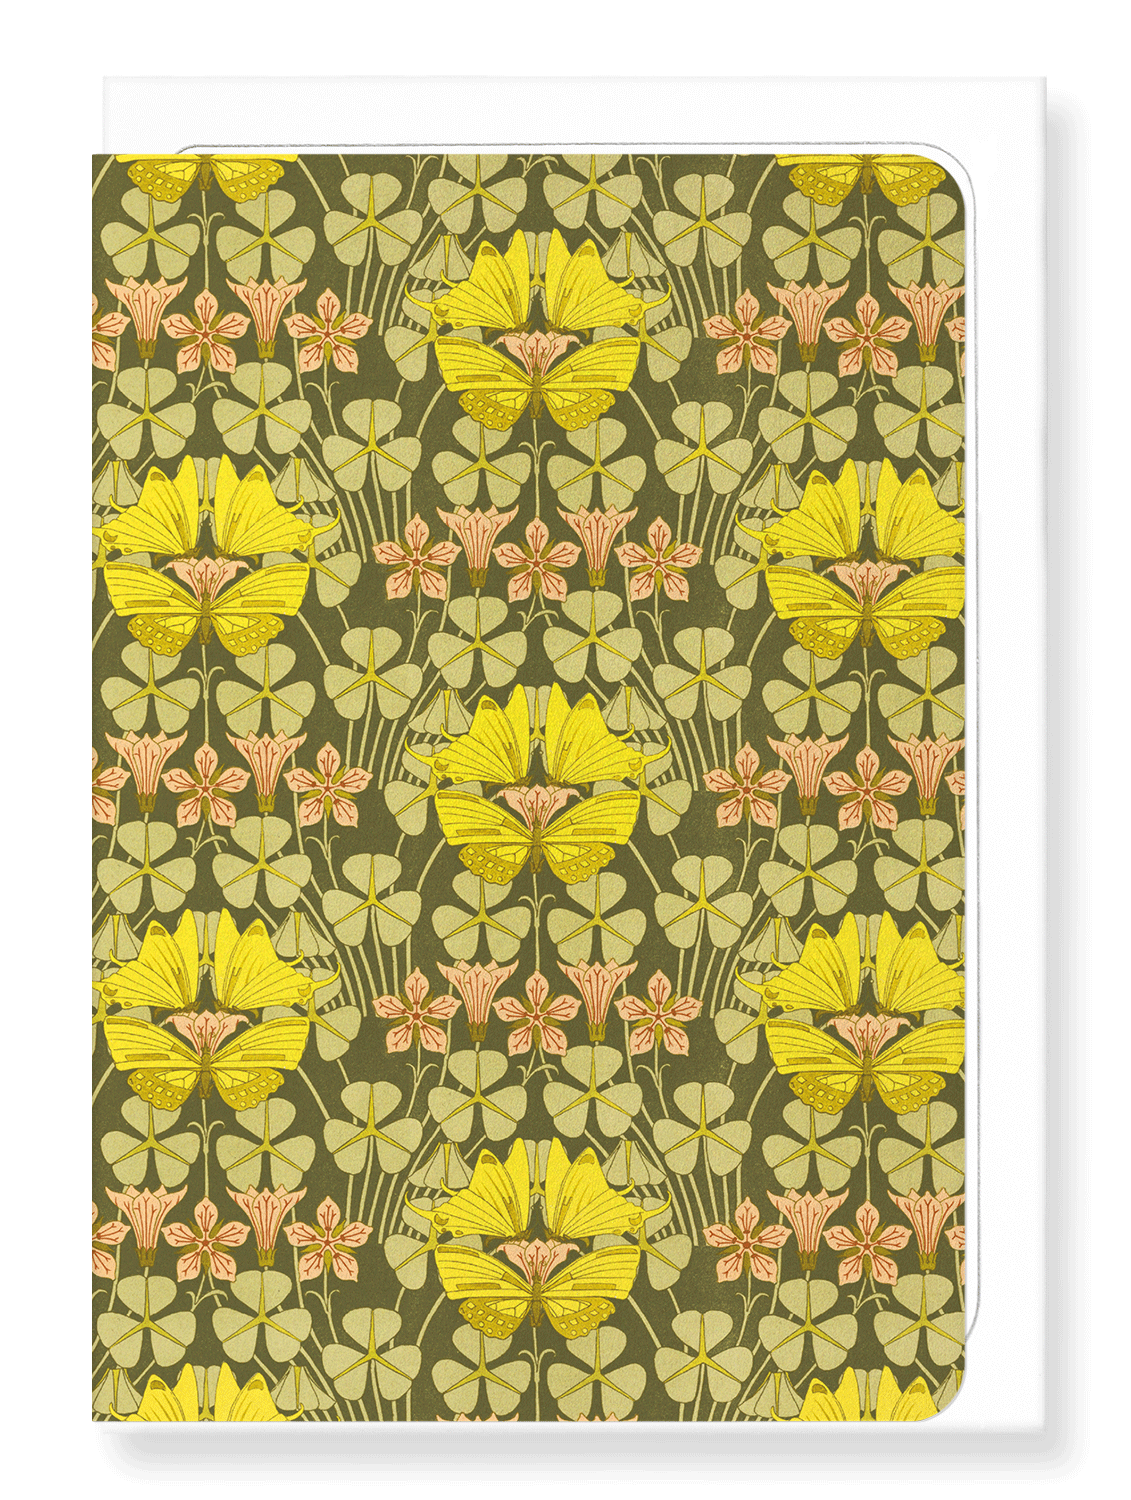 Ezen Designs - Butterflies and clovers (1897)  - Greeting Card - Front